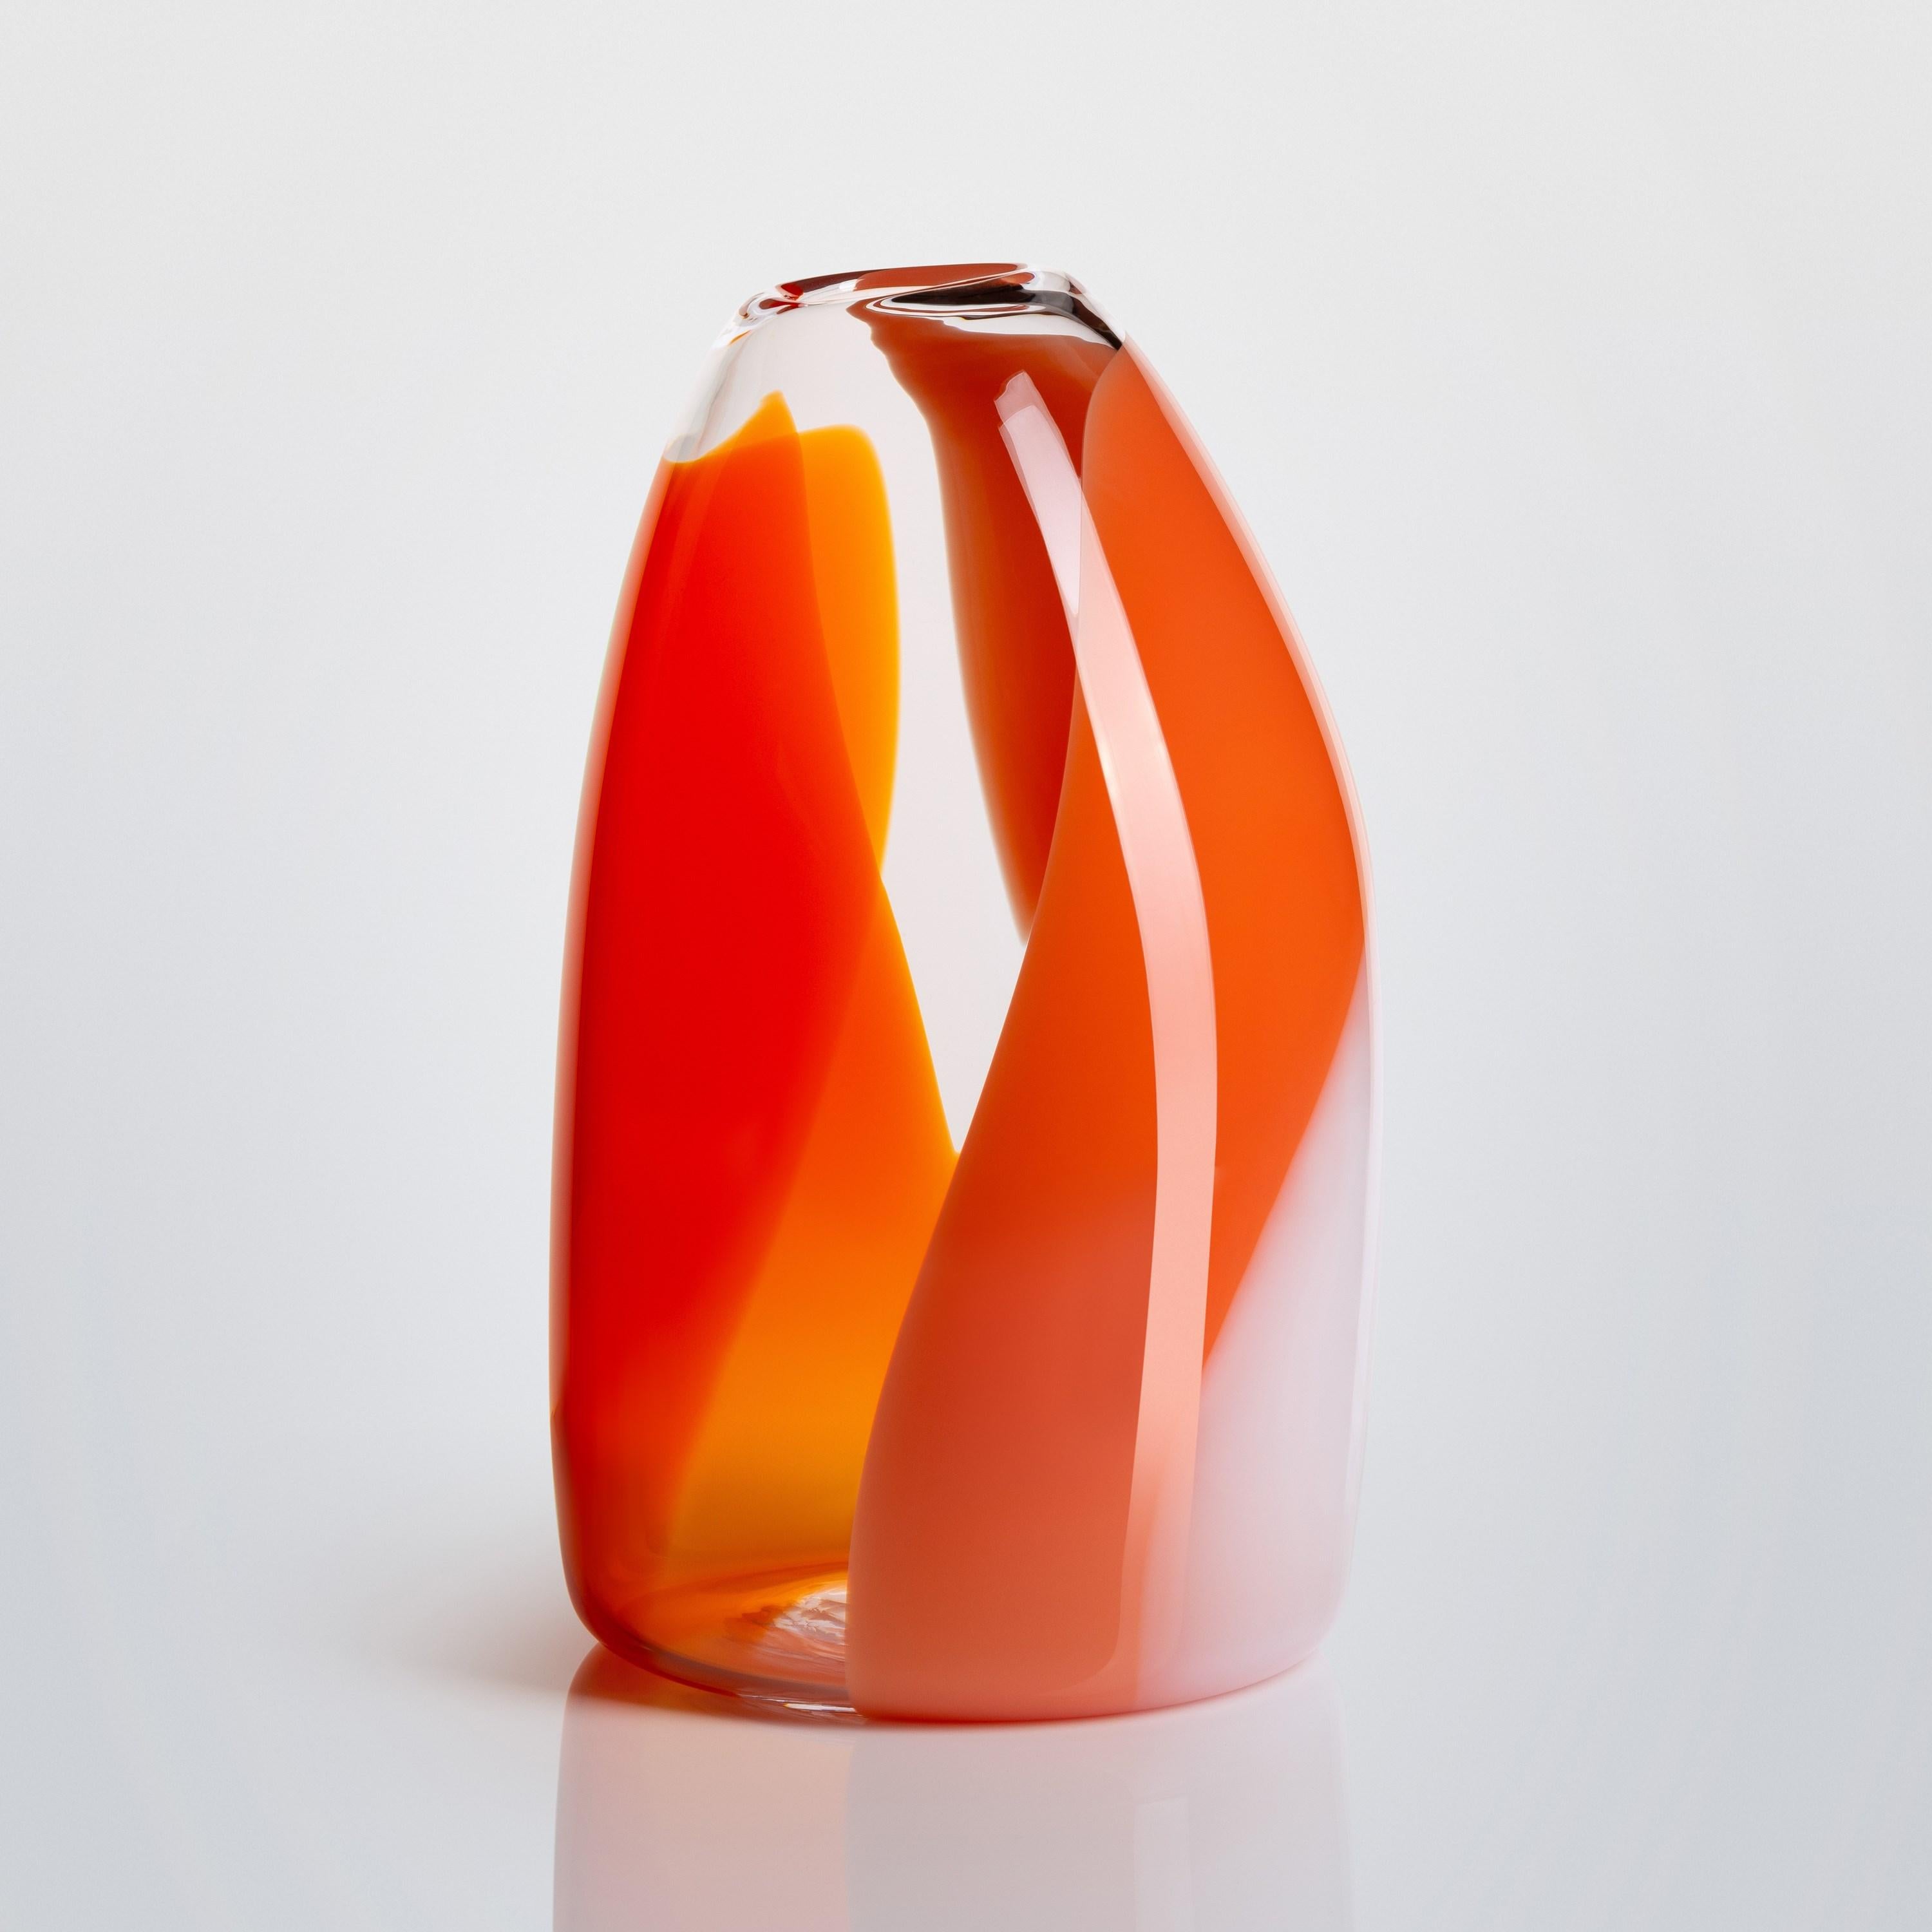 'Waves No 487' is a handblown glass vase by the British artist, Neil Wilkin.

'Waves' is a collection of beautifully crafted, unique glass bowls and centrepieces by the British artist Neil Wilkin. Taking a painterly approach, Neil Wilkin merges his